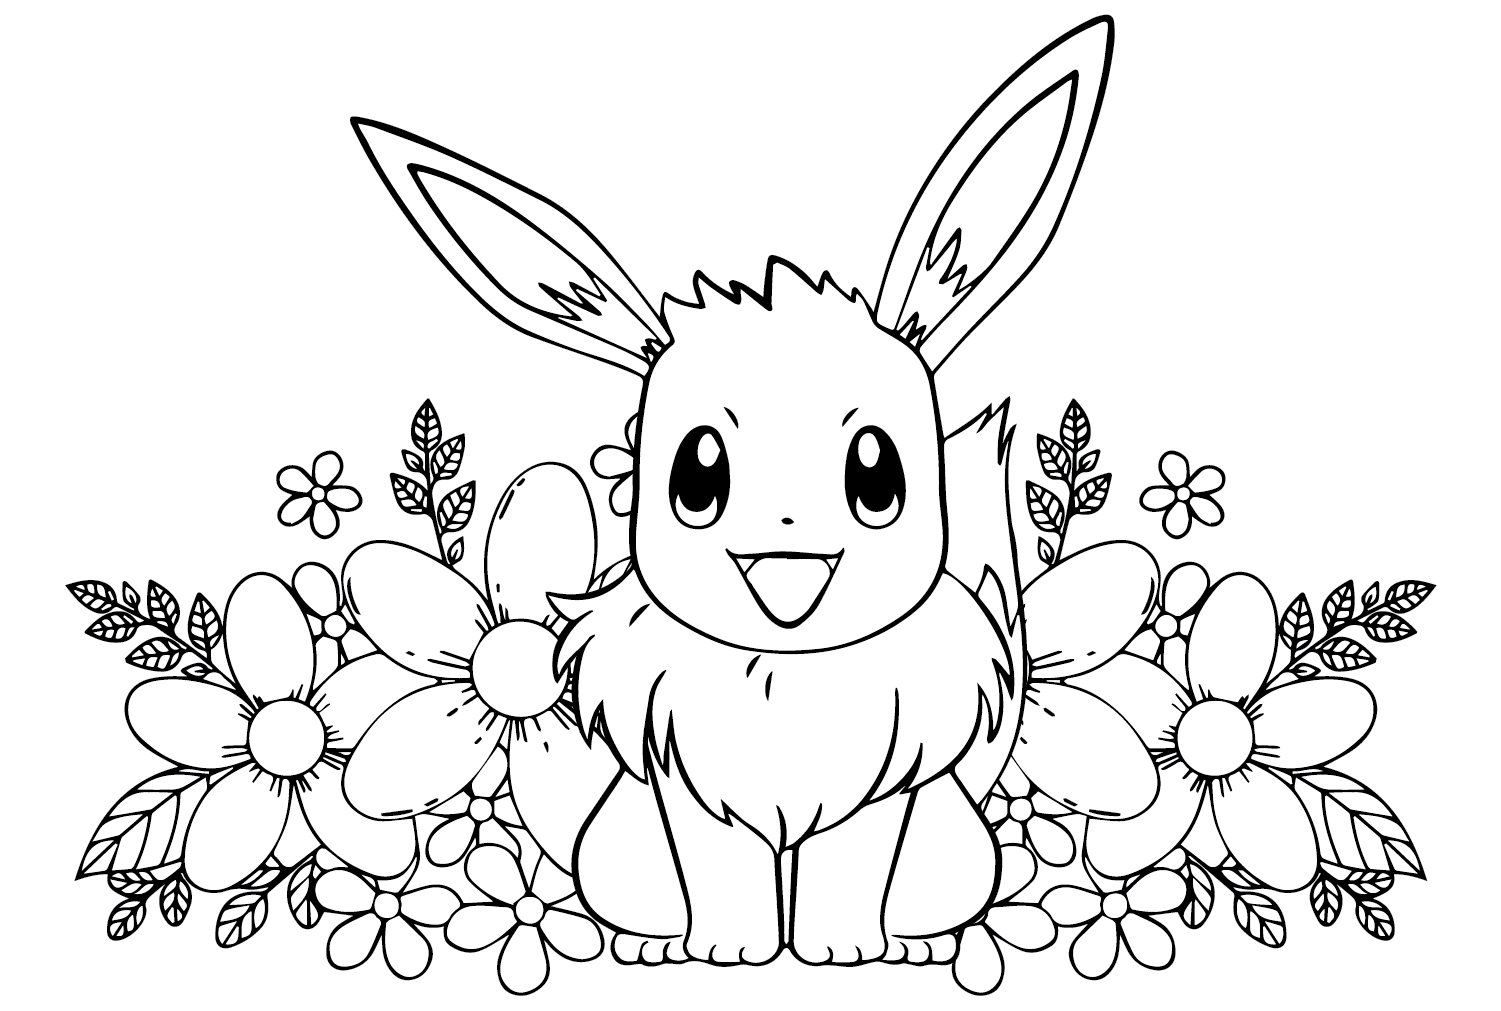 Eevee Pokemon Coloring Pages to Printable from Eevee